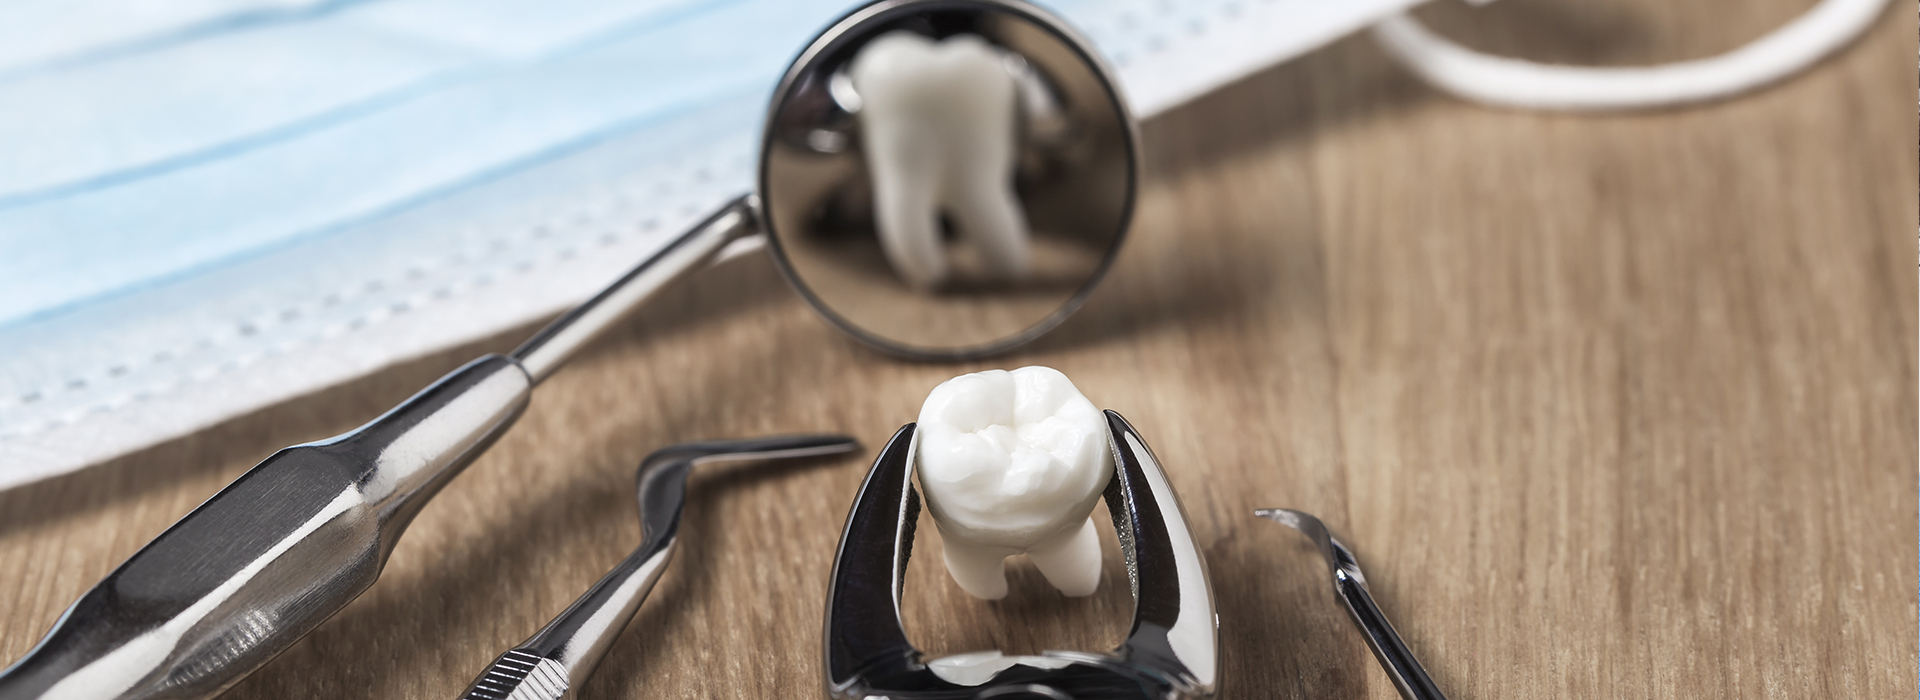 All About Smiles | Root Canals, Invisalign reg  and Sleep Apnea